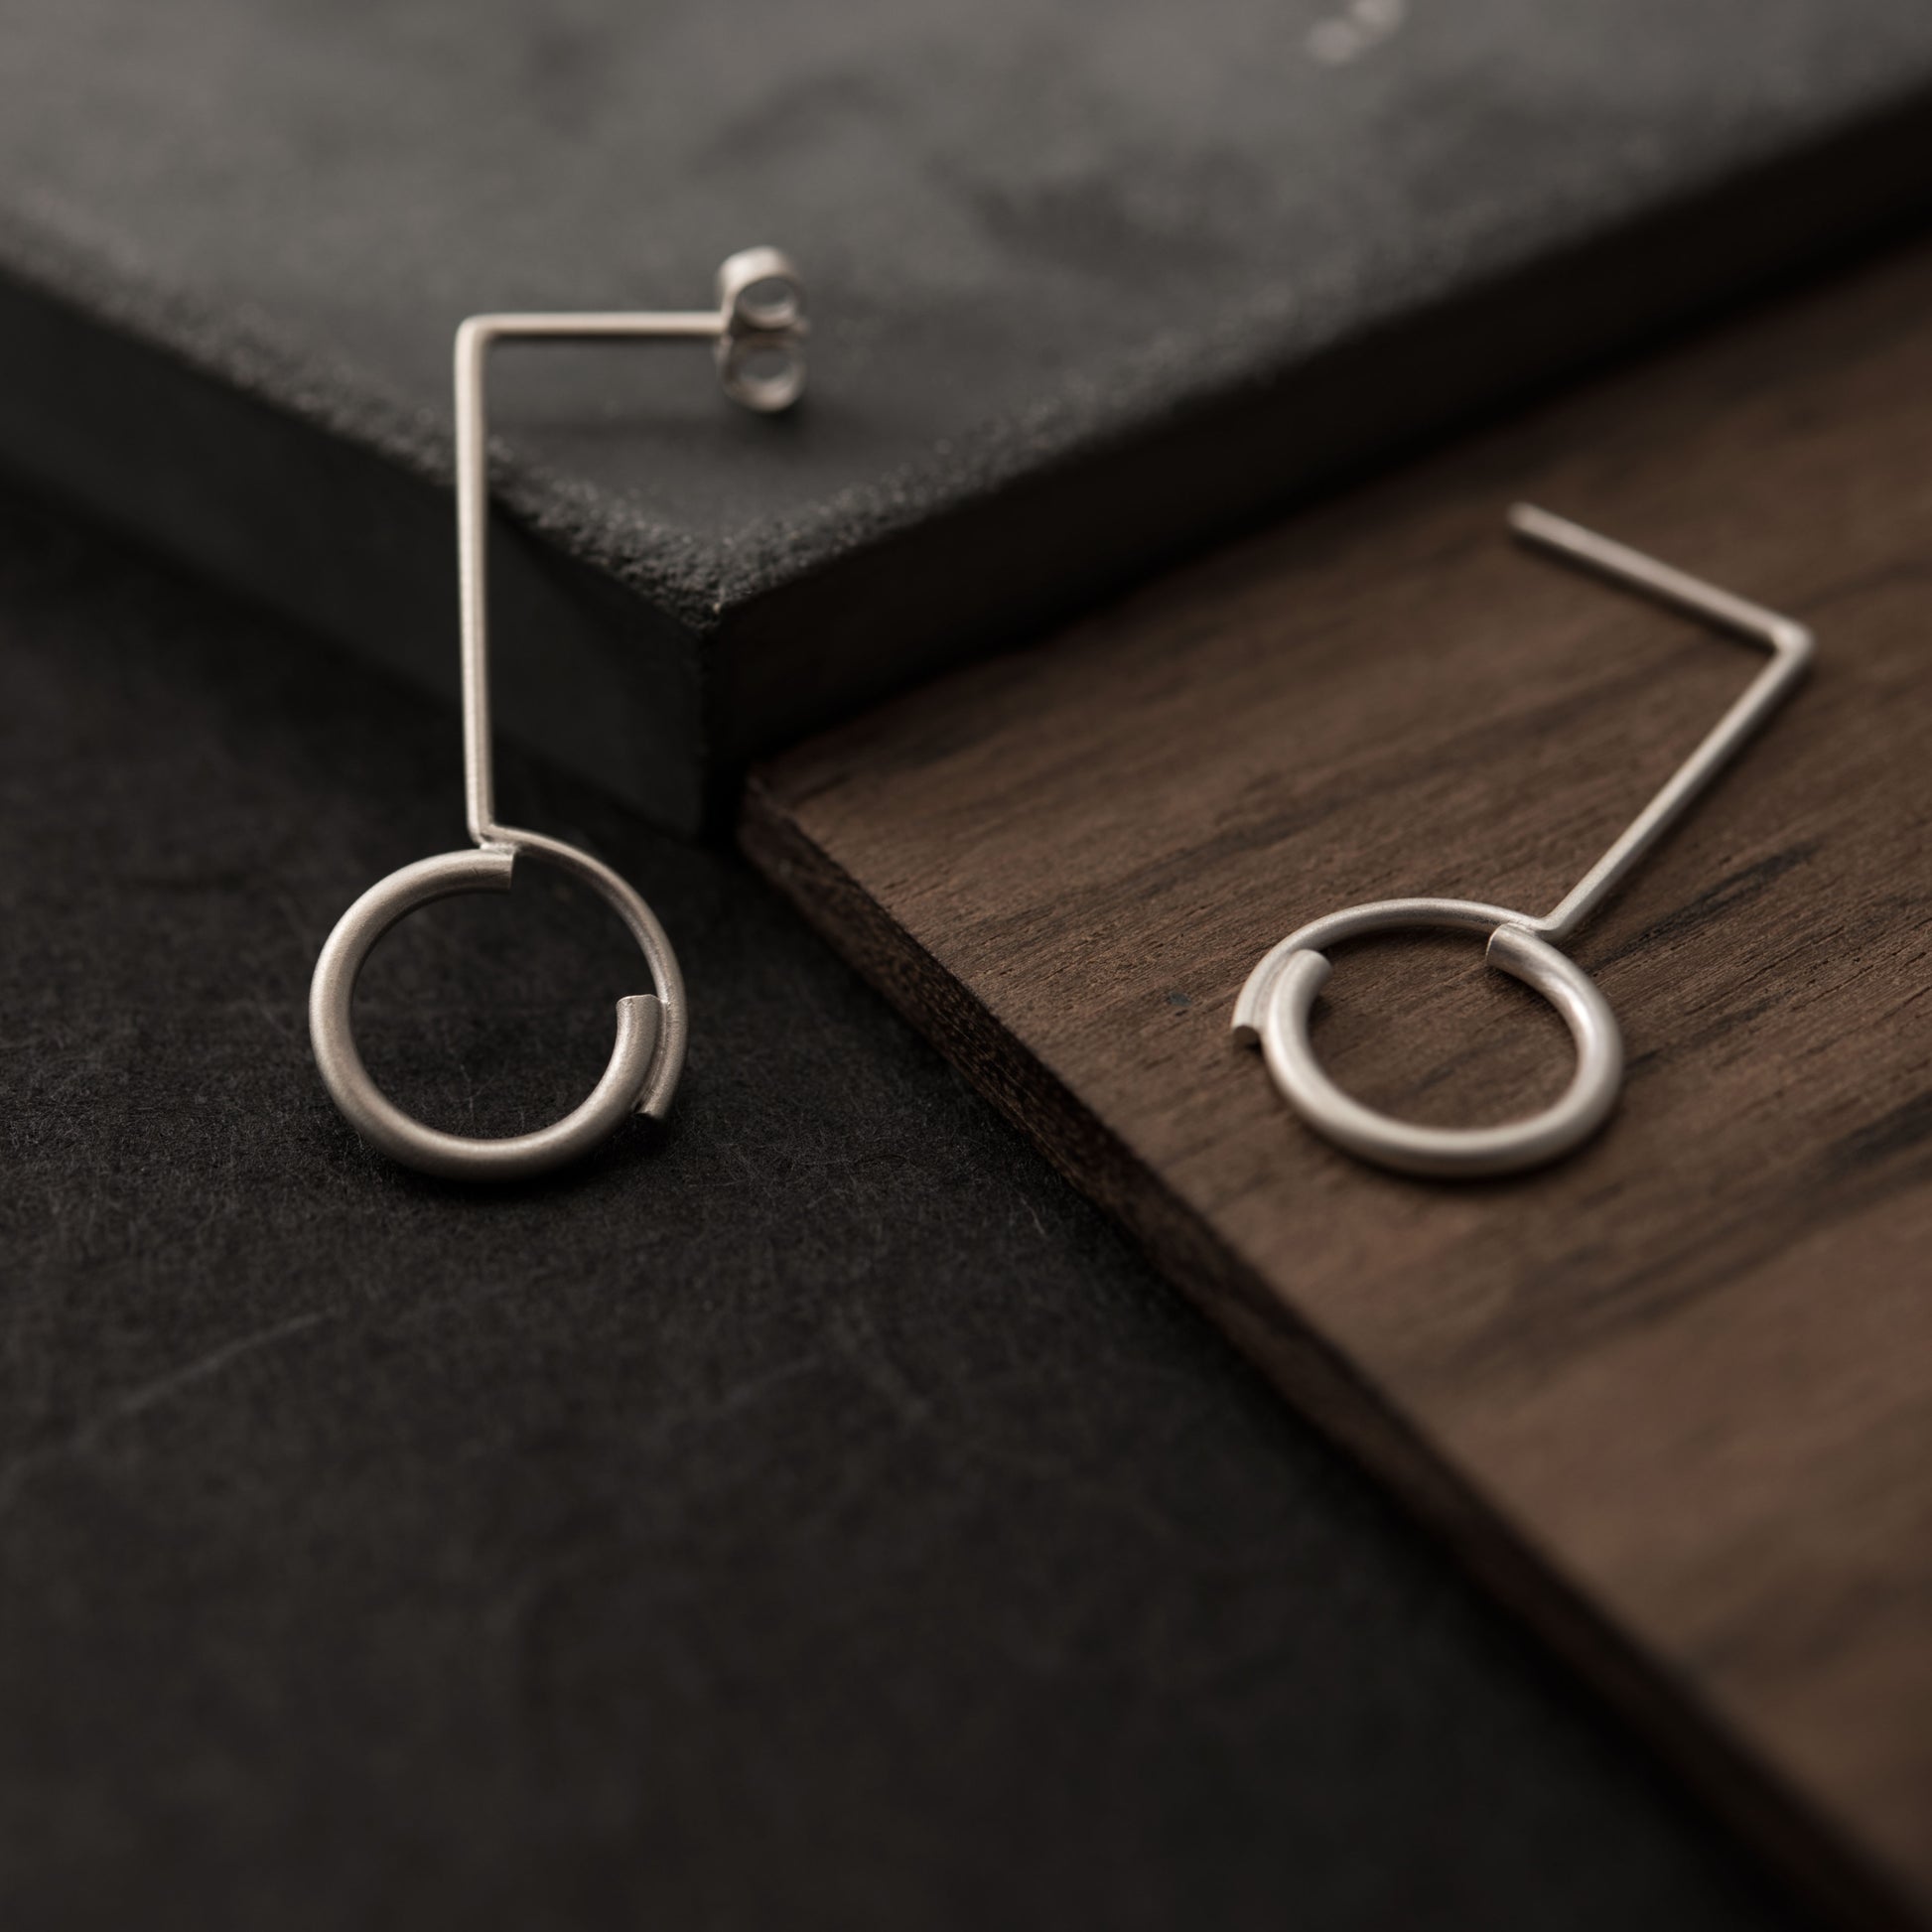 A close up of a pair of sterling silver earrings of 32 millimeters in height in a dark backgroung 